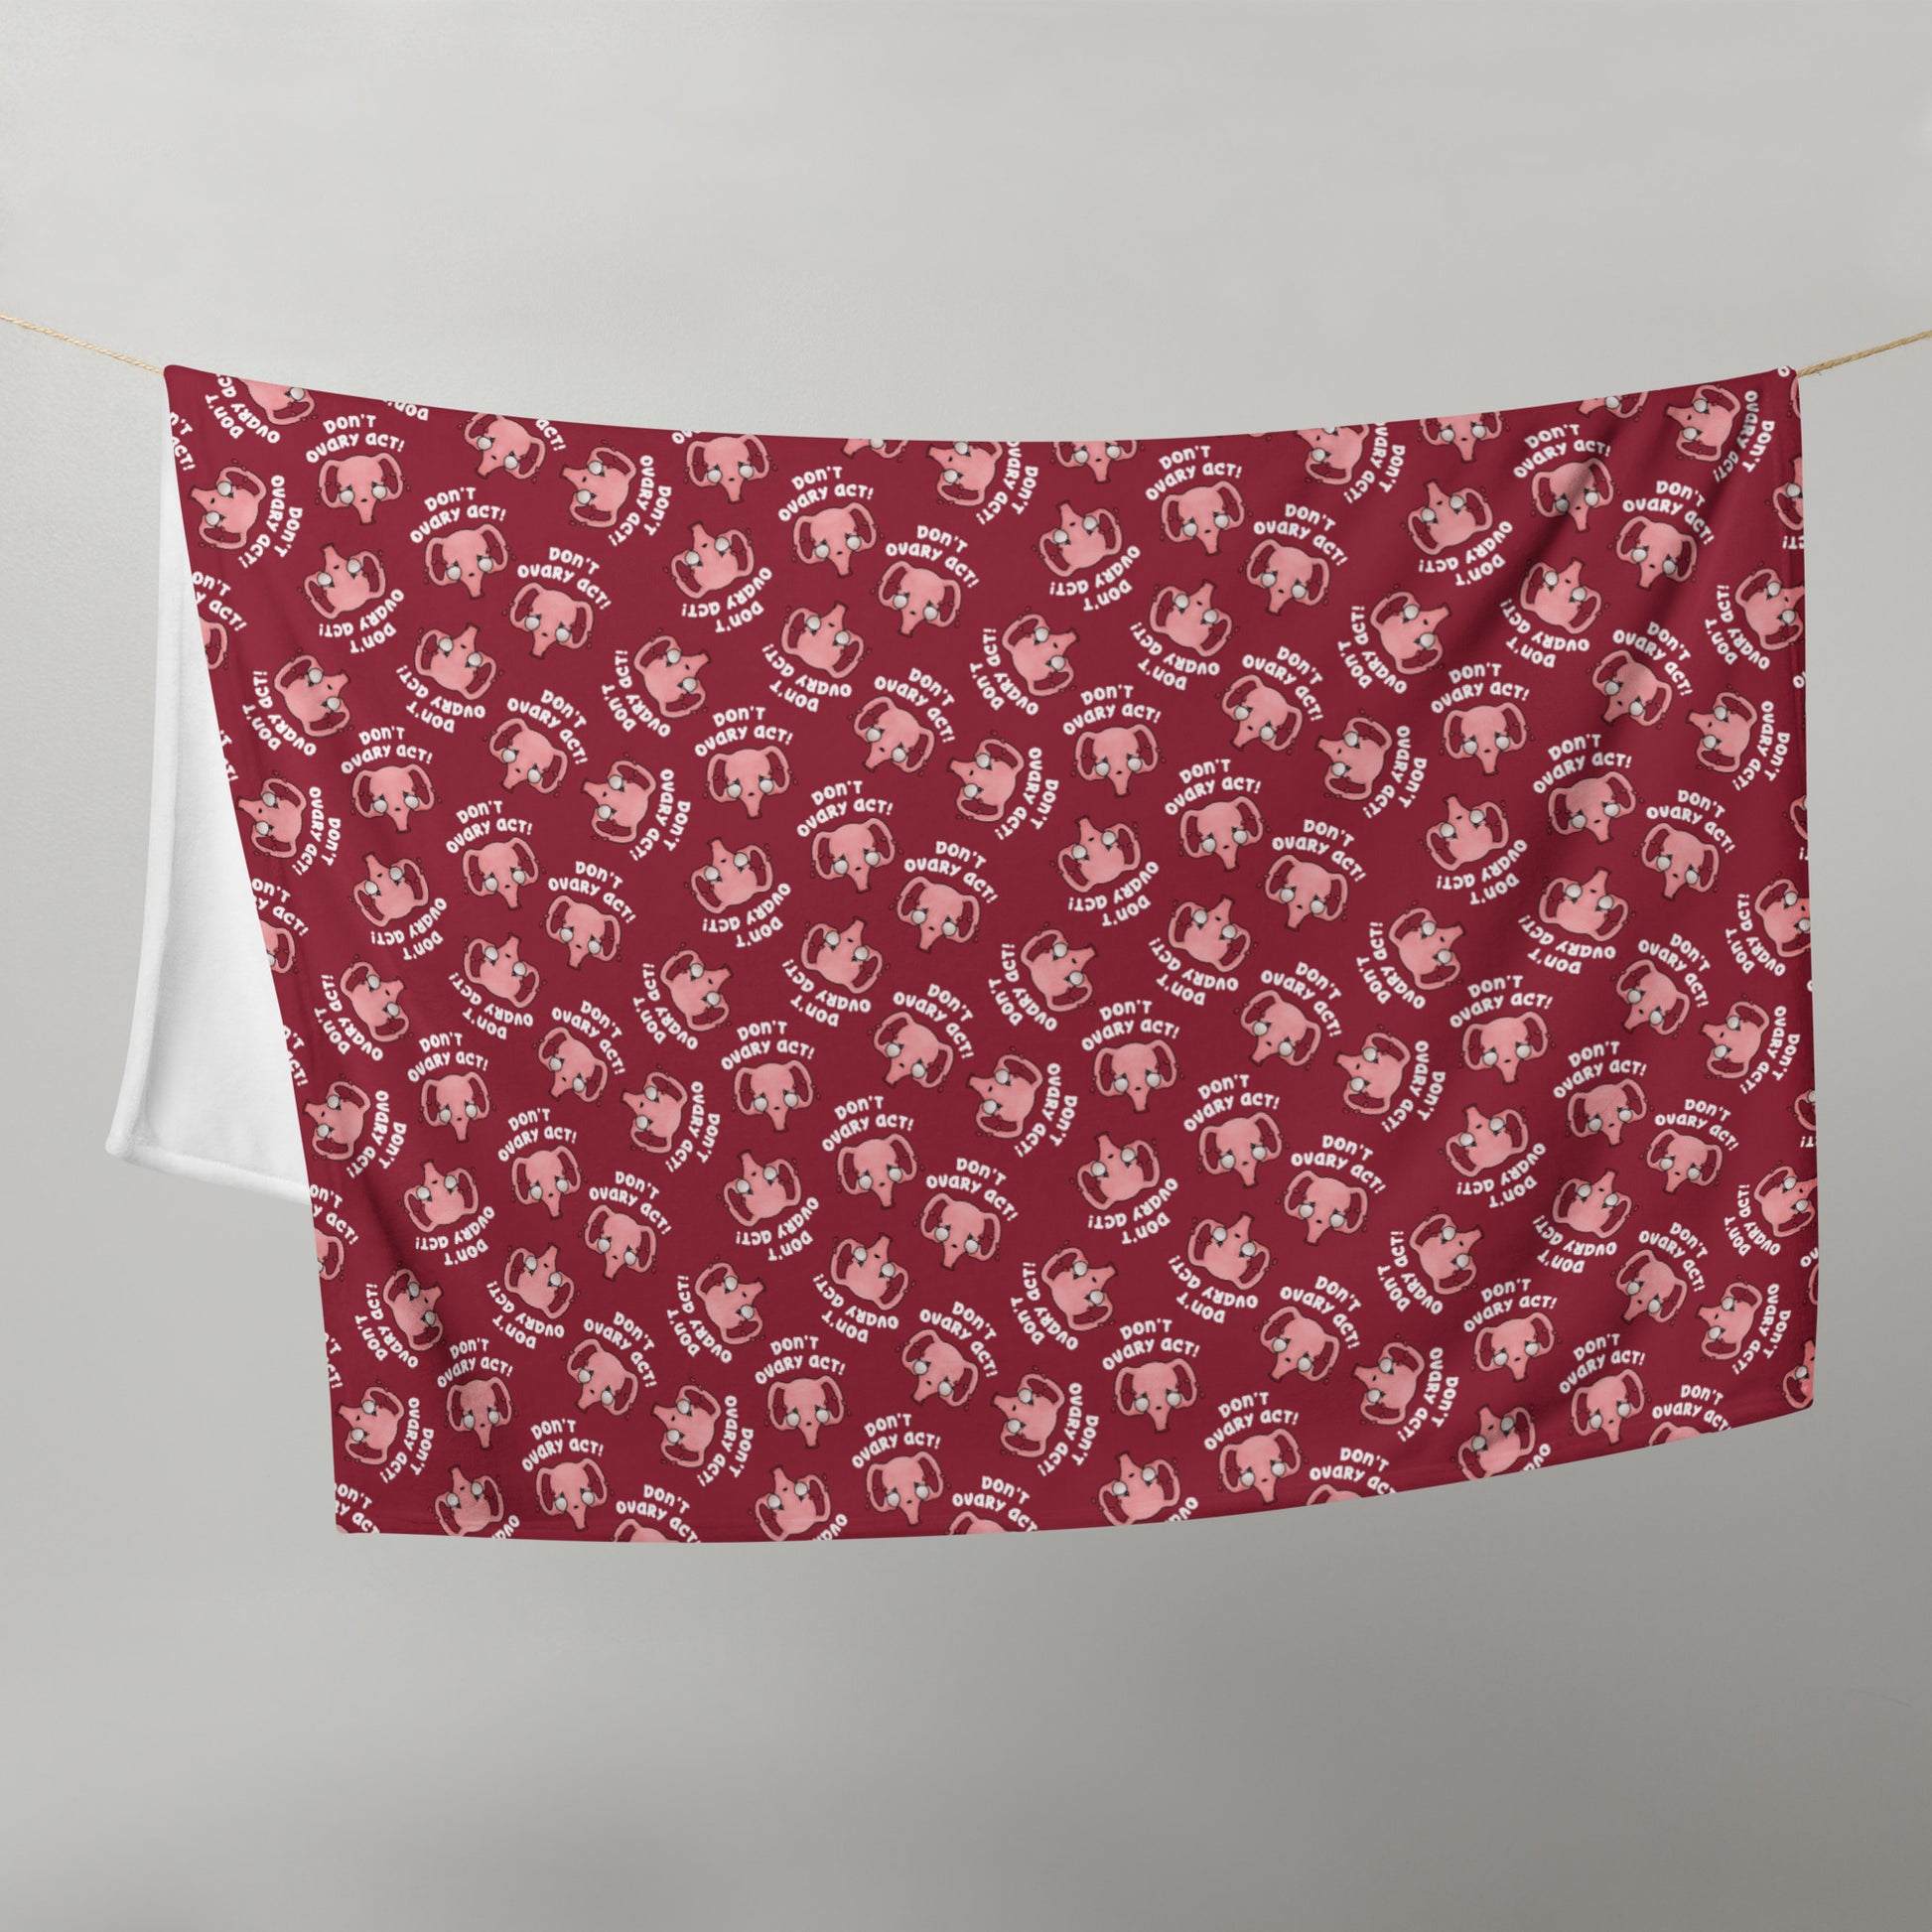 image of 50" x 60" red blanket hanging in half on a clothes line to show size with repeated pattern image of cute uterus characters crying and the text Don't Ovary Act